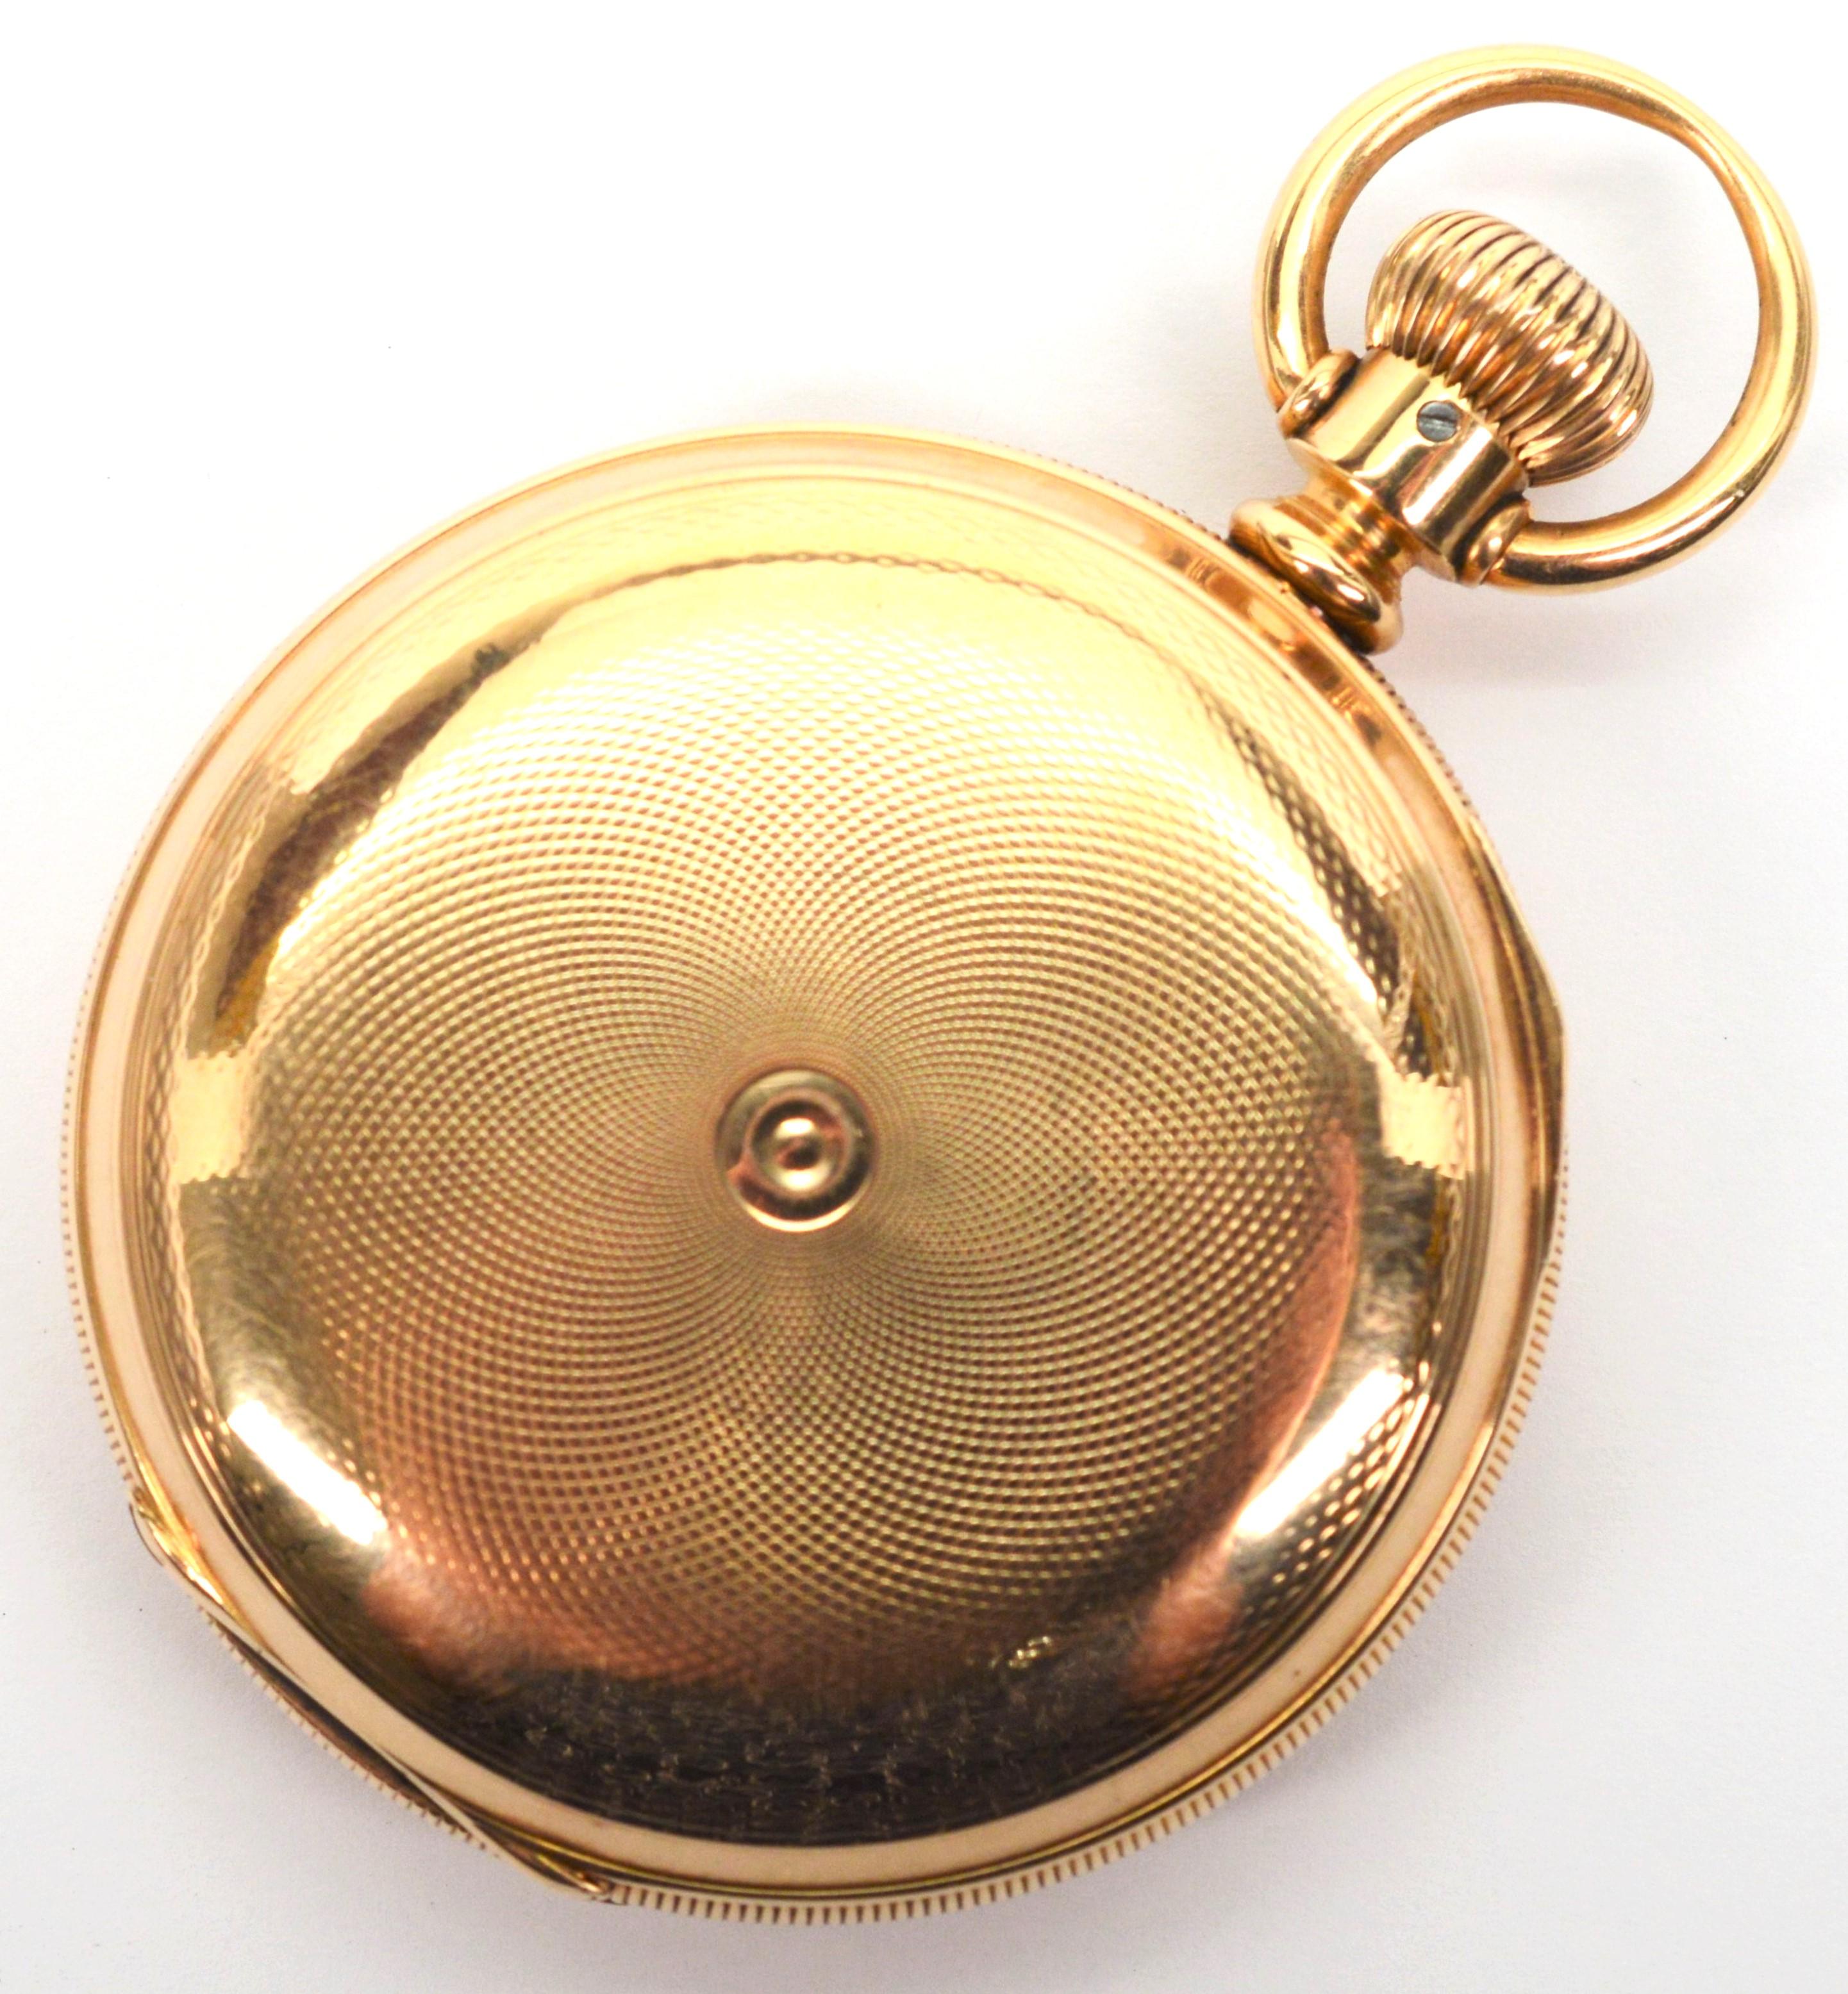 Elgin National 14K Yellow Gold Pocket Watch w Chain Elks Tooth Fob   In Good Condition For Sale In Mount Kisco, NY